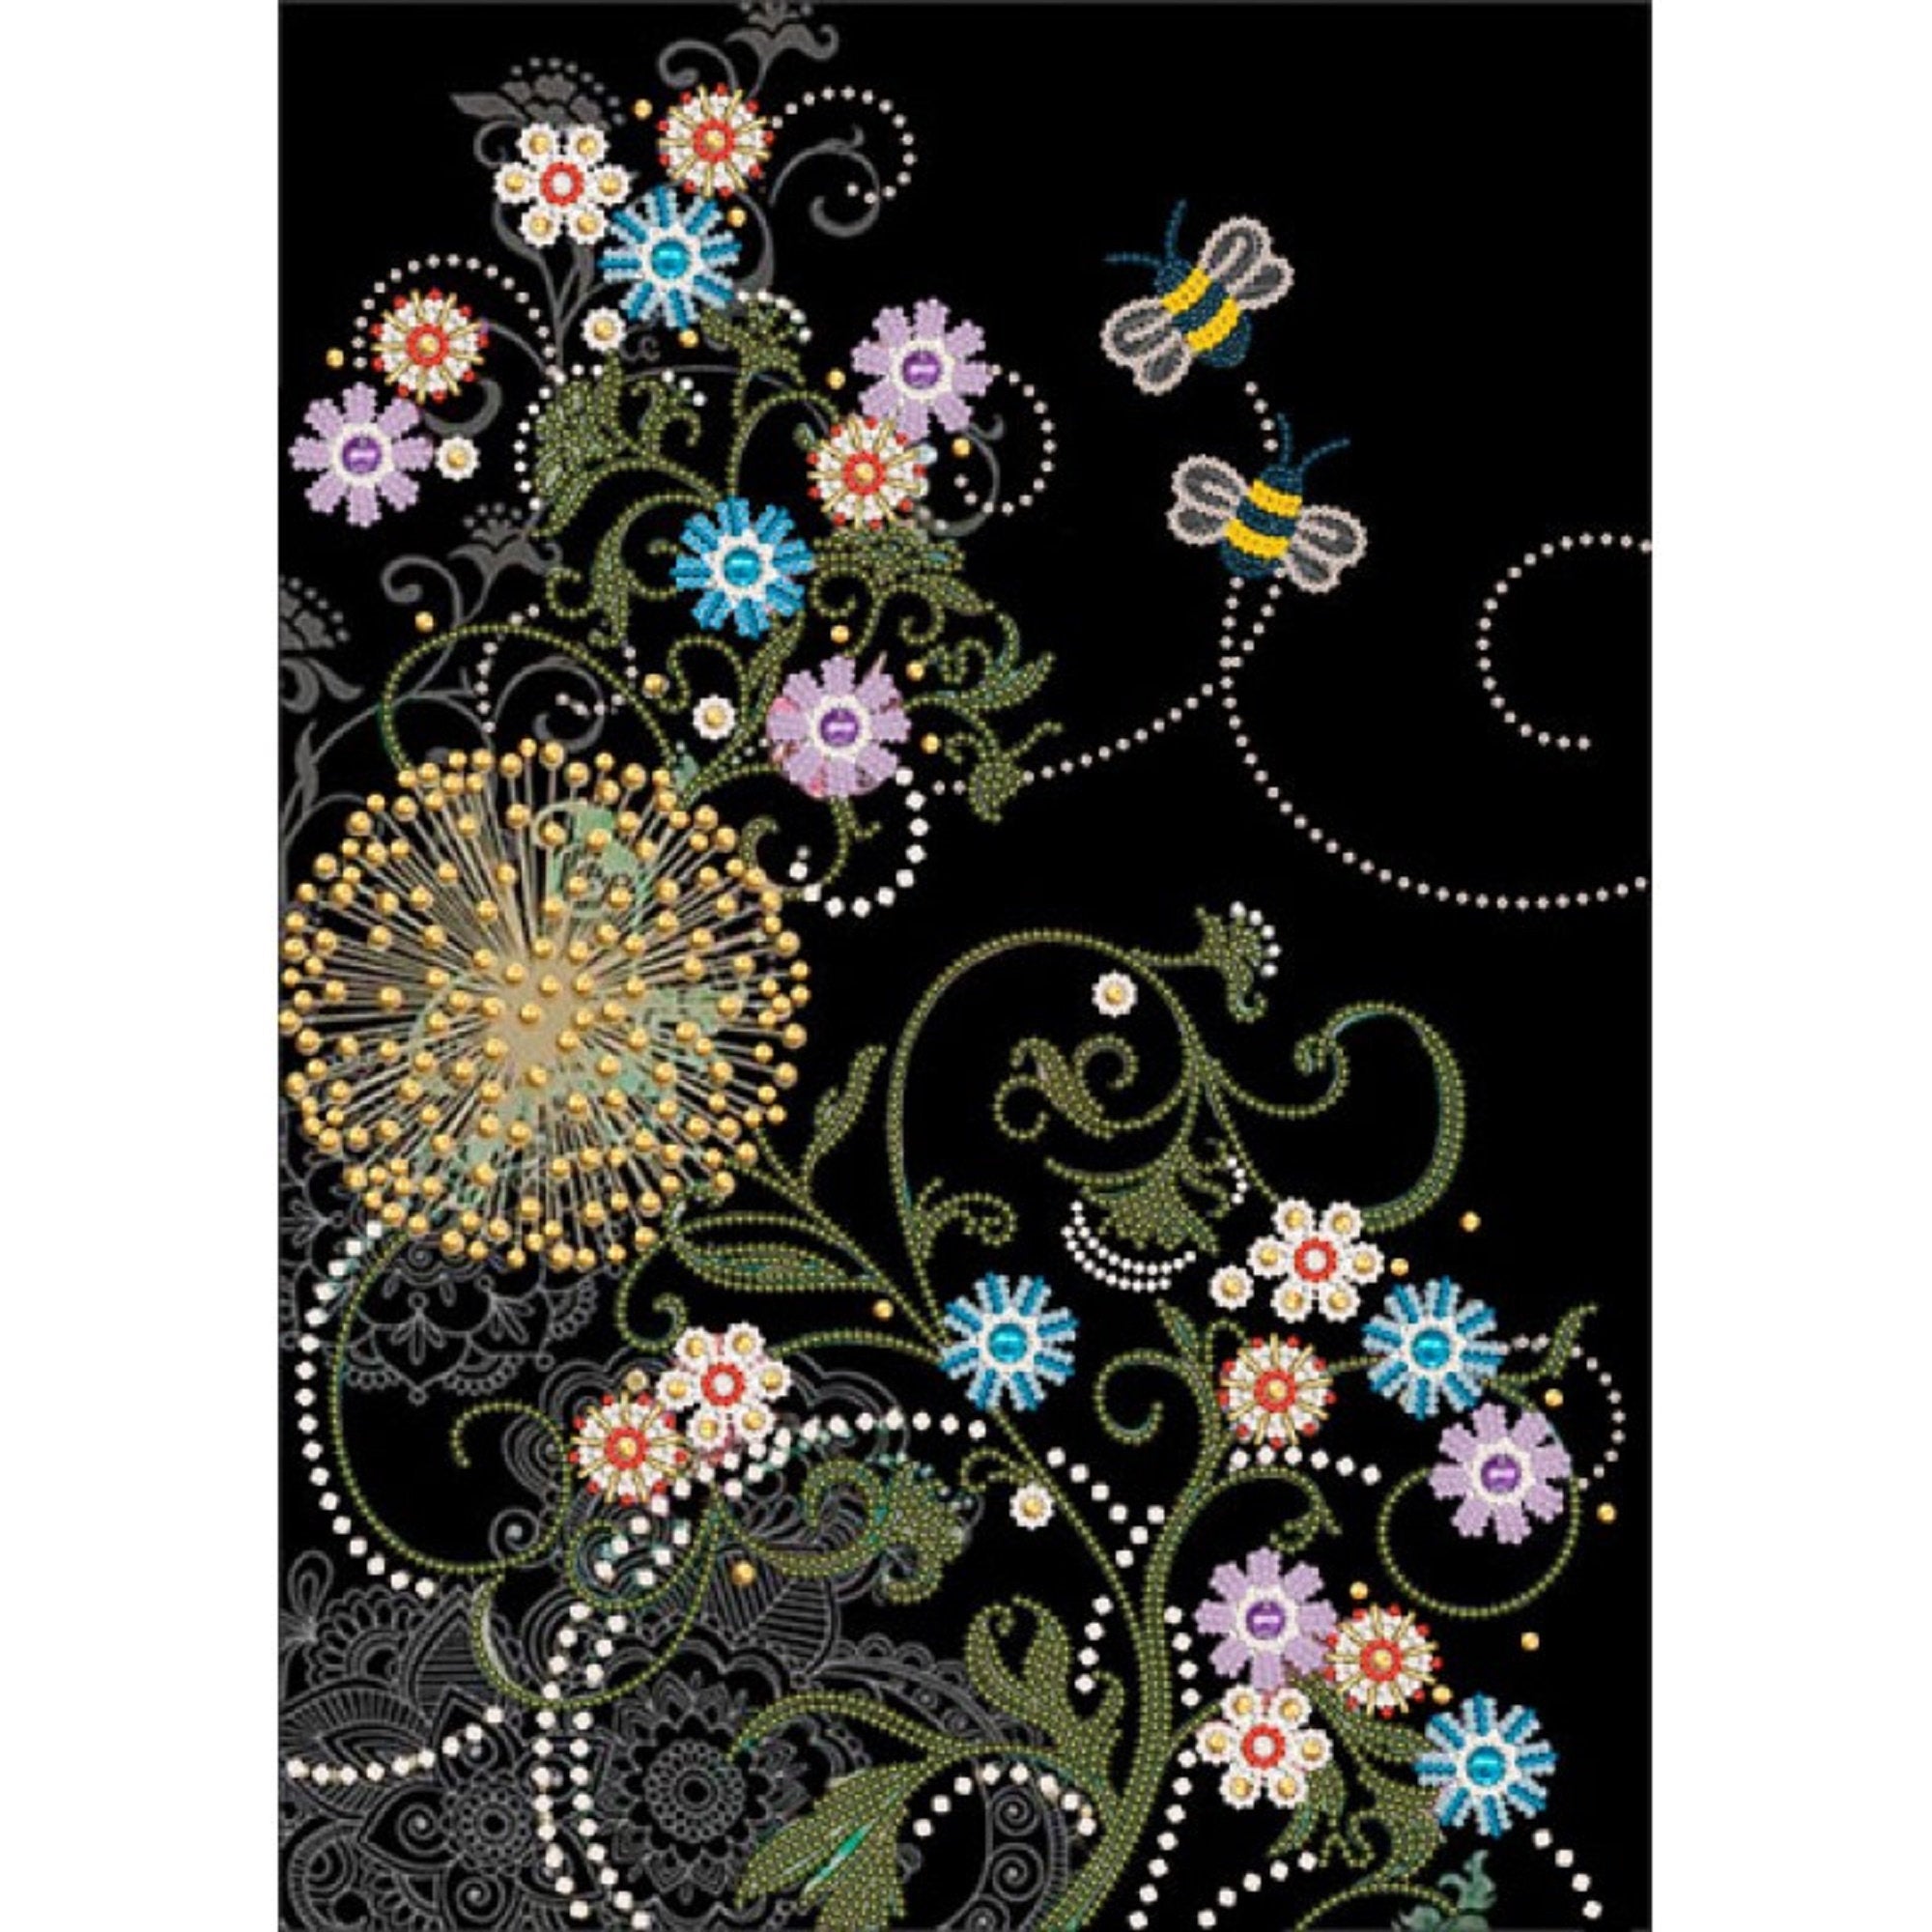 Embroidery with beads and stones flower fantasy bead embroidery kit